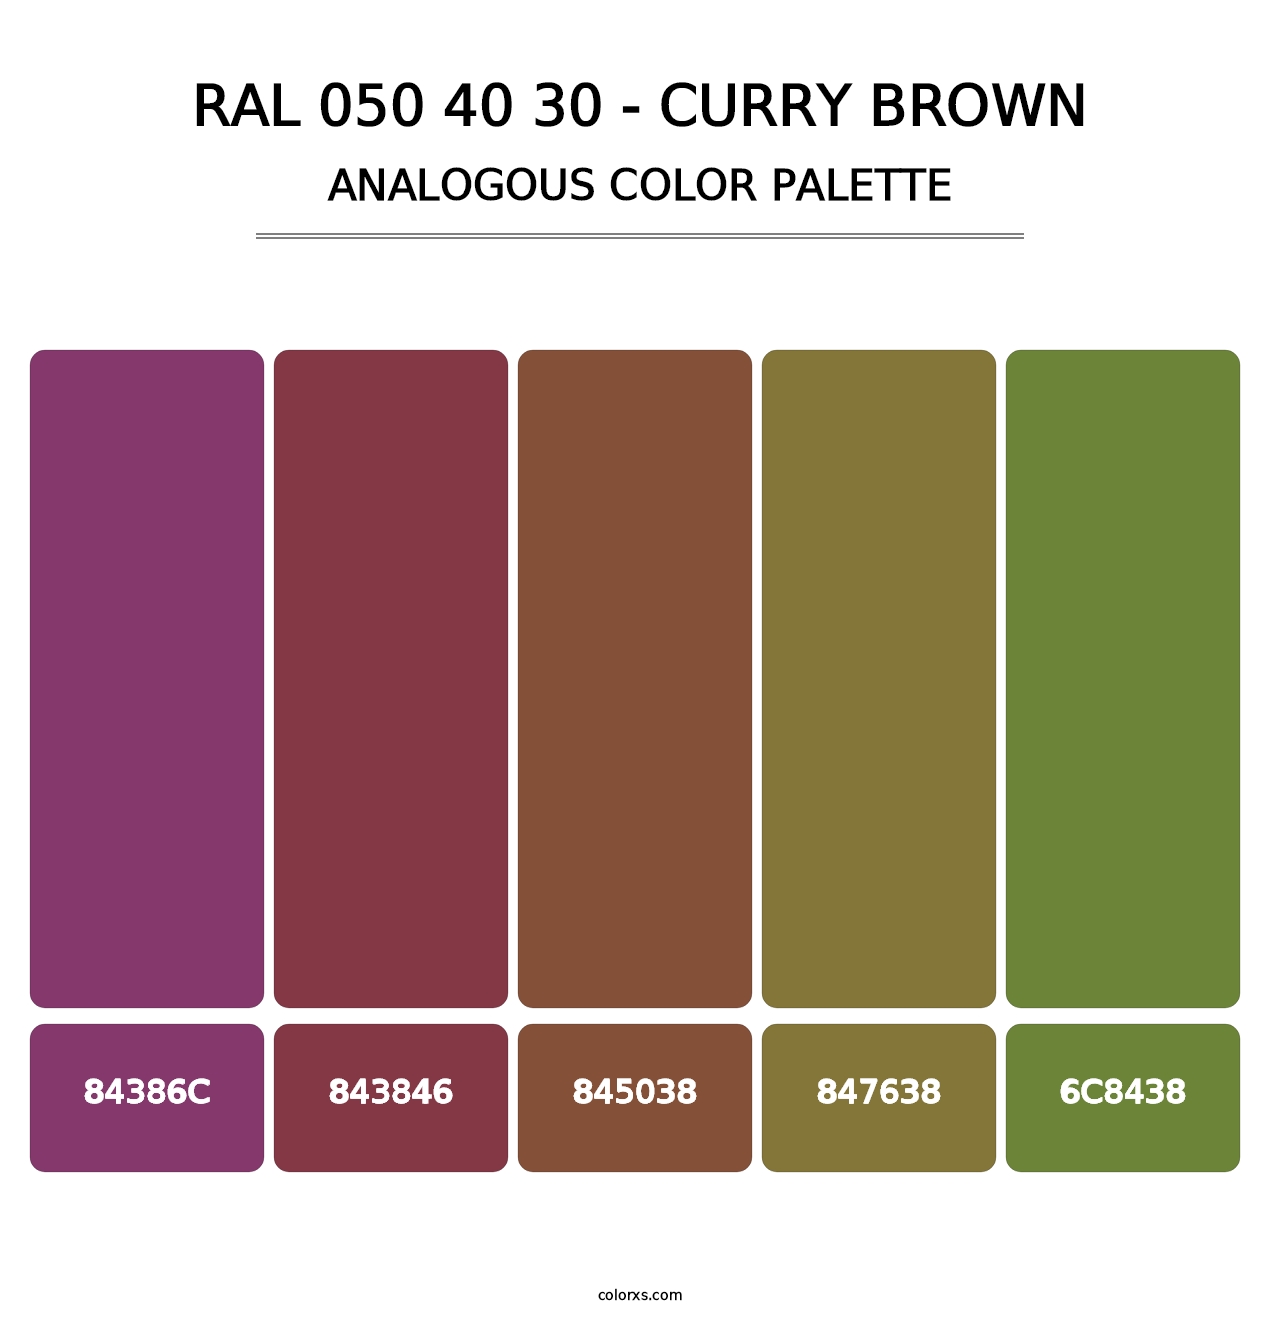 RAL 050 40 30 - Curry Brown - Analogous Color Palette